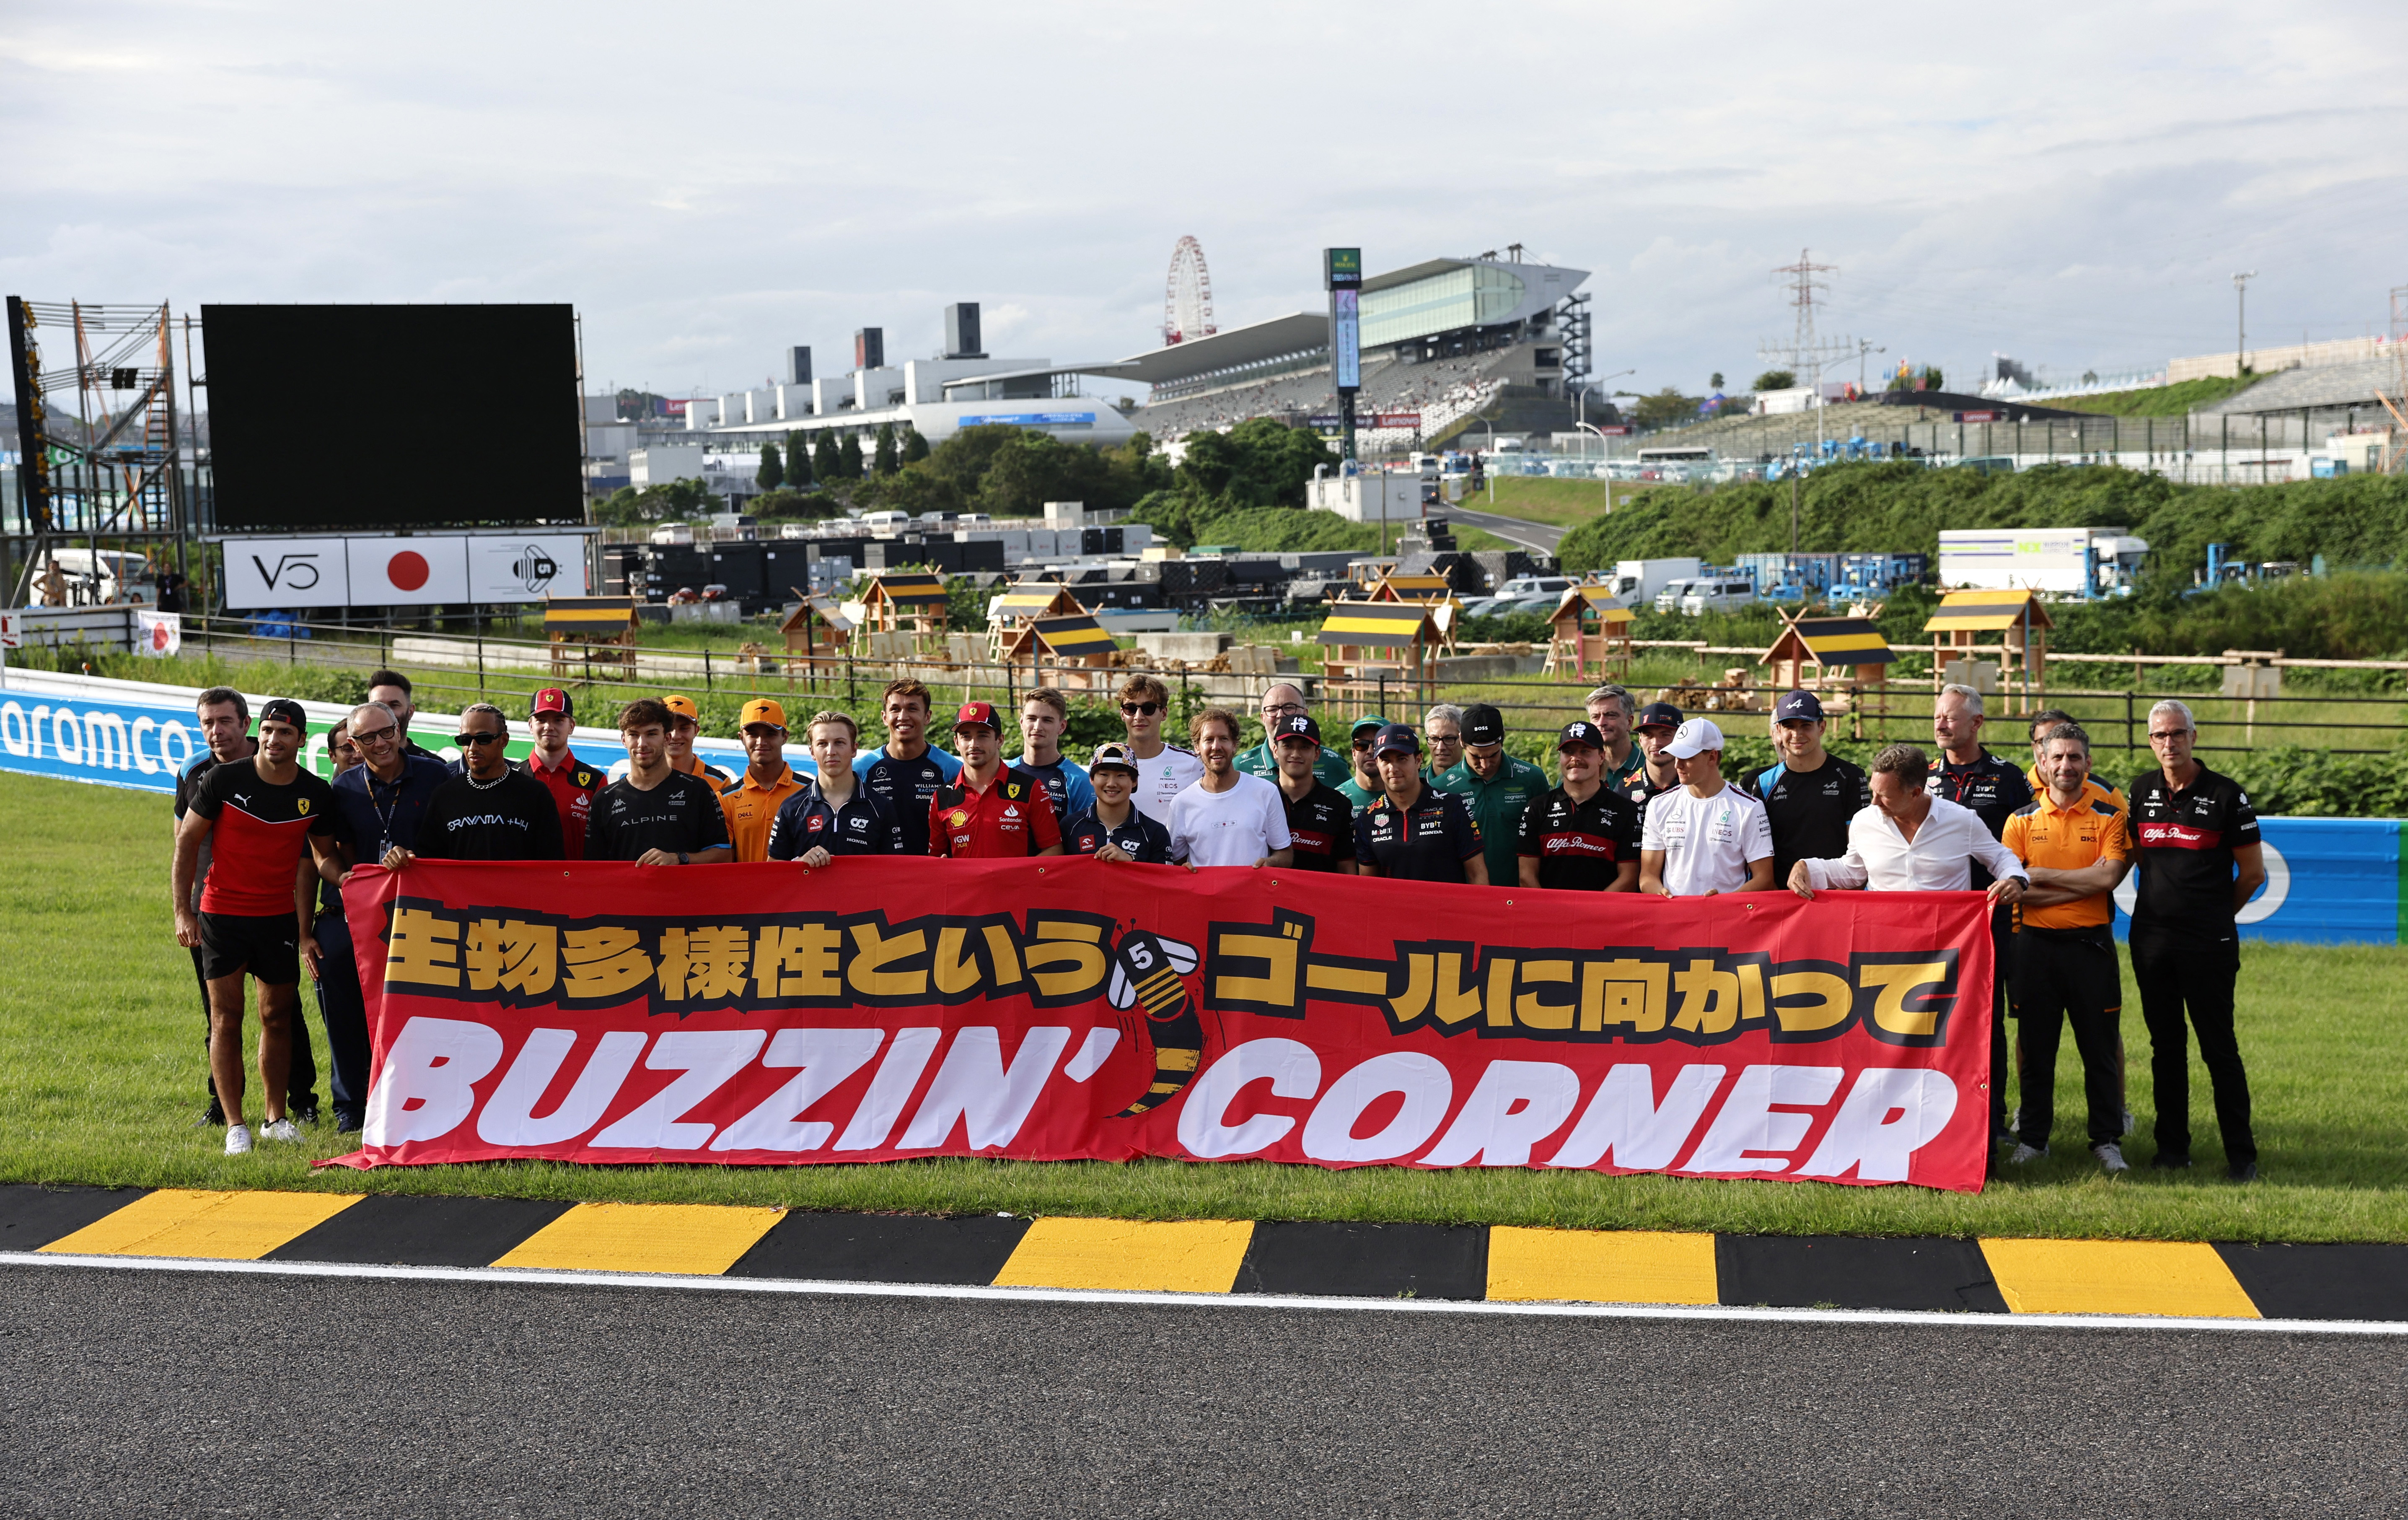 What makes Suzuka Circuit so special for drivers?